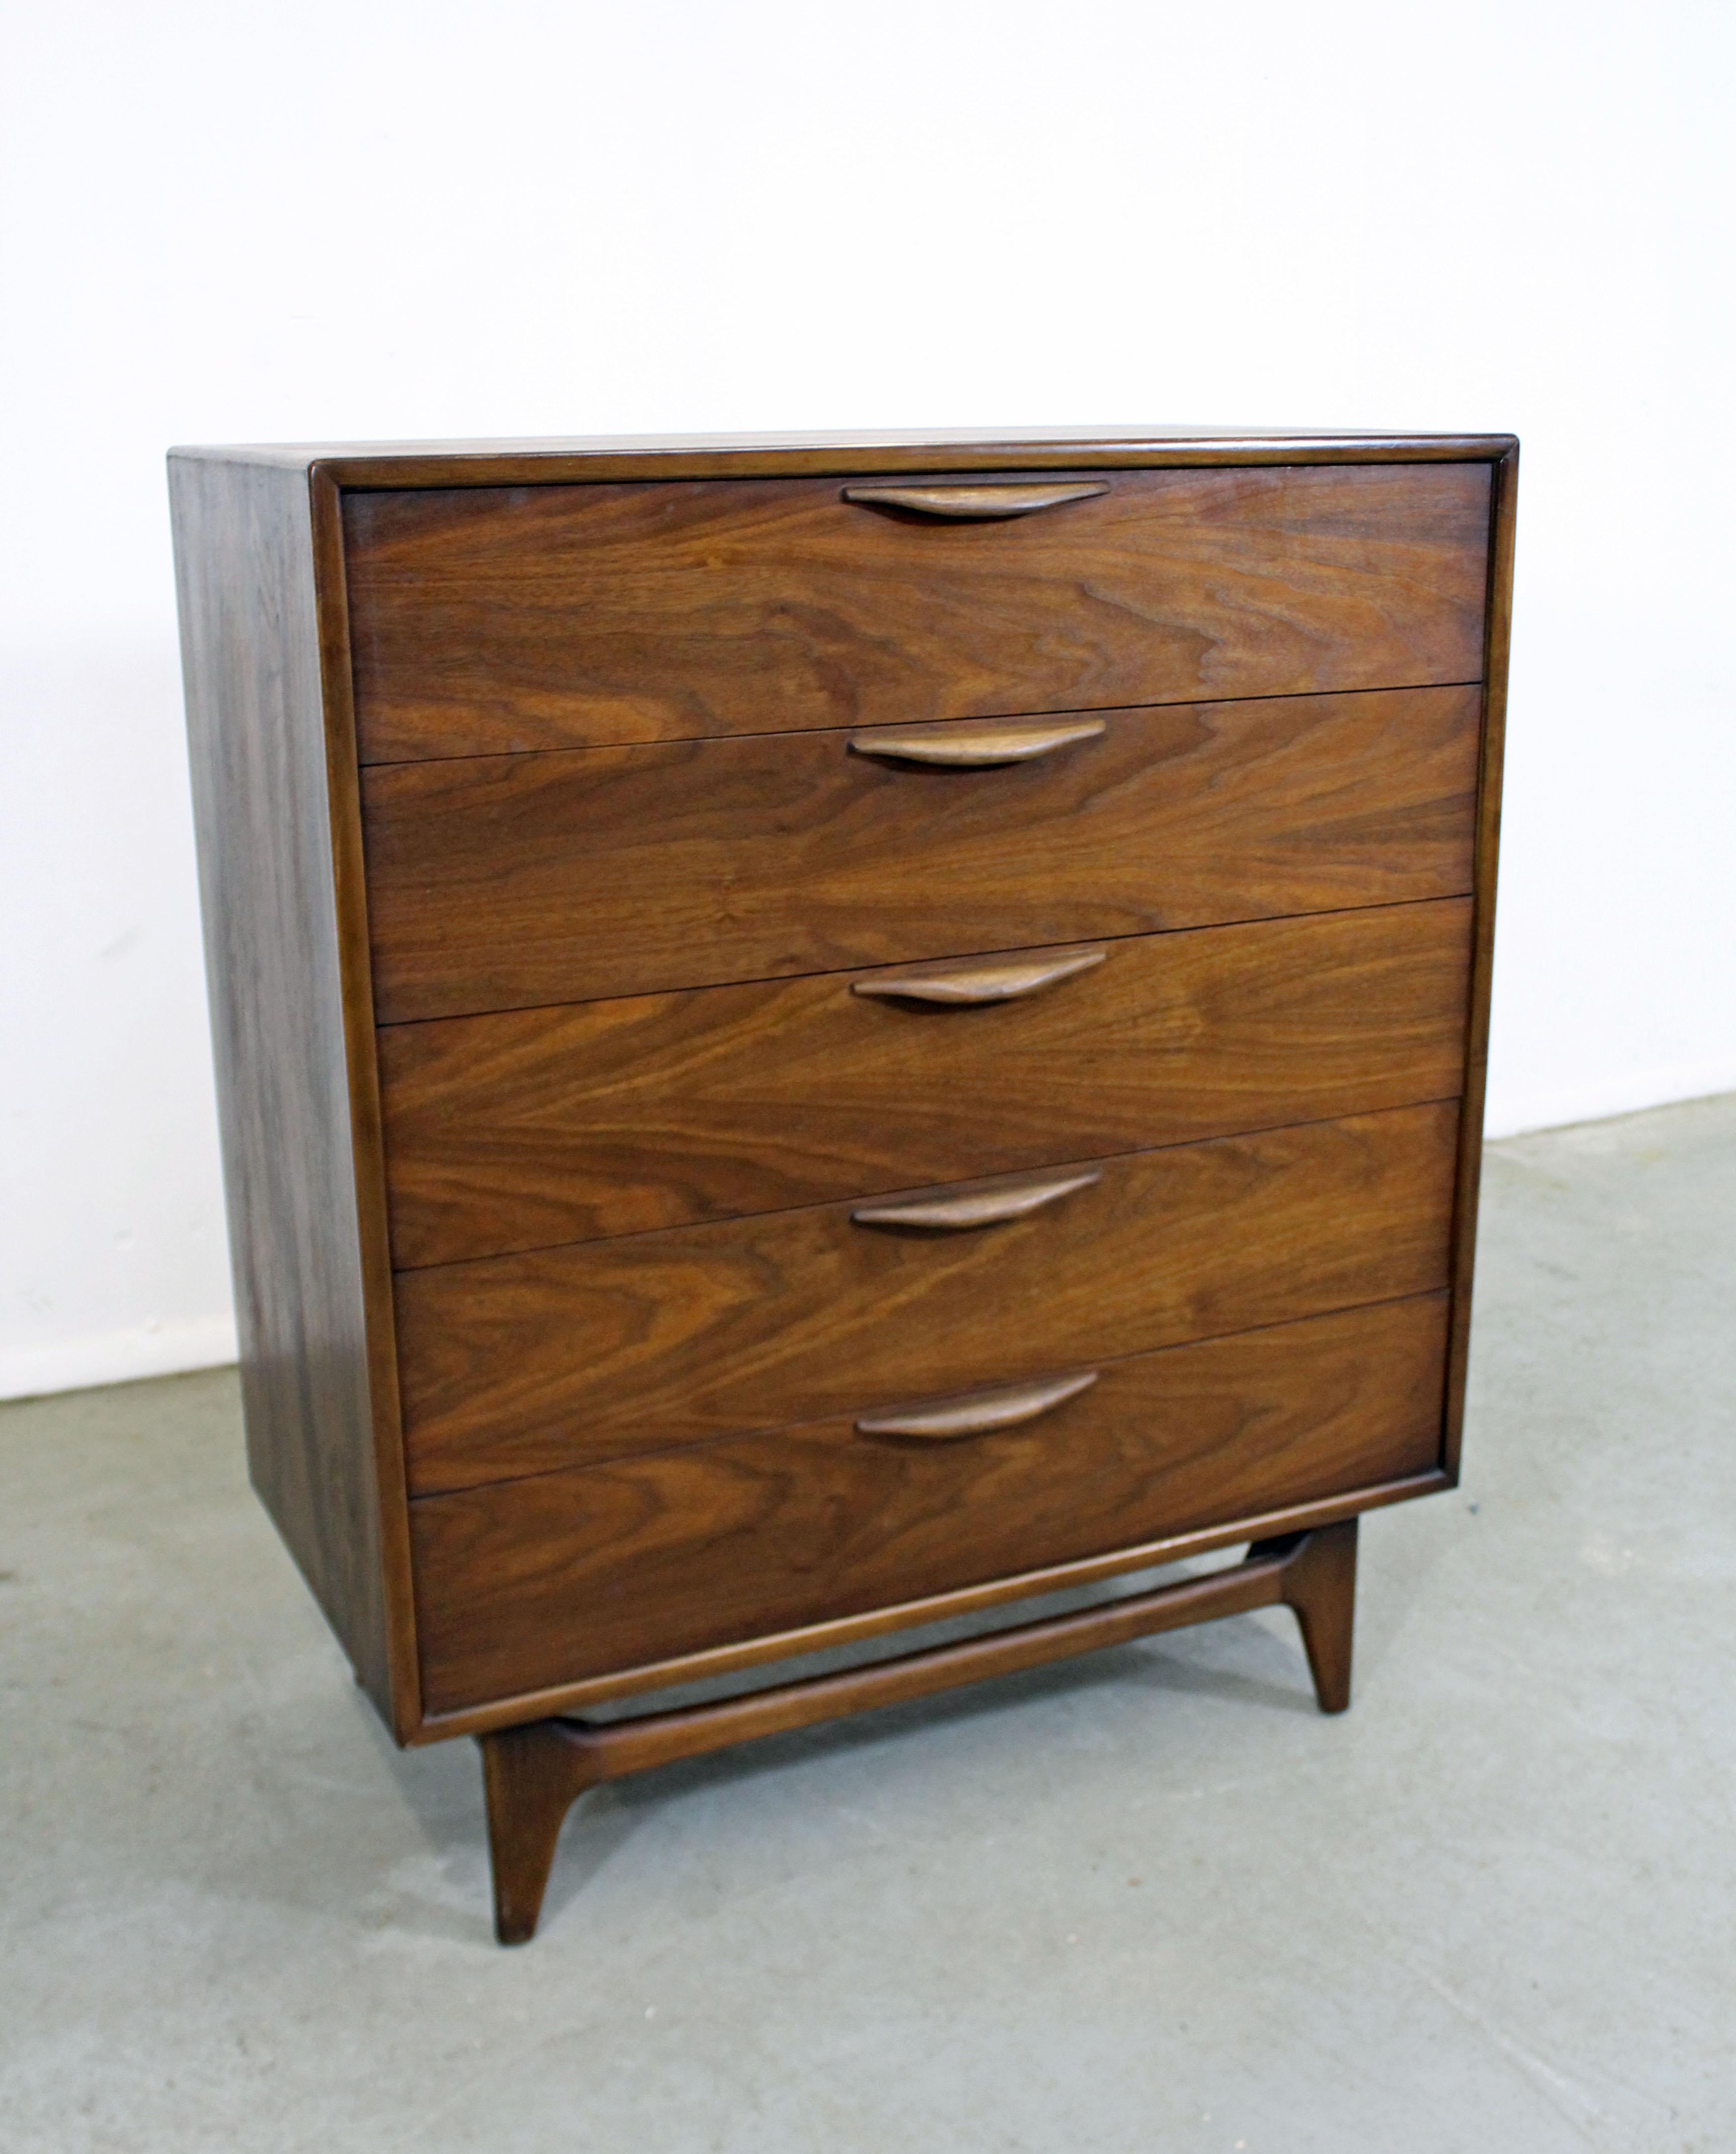 Offered is an excellent example of American Mid-Century Modern design, a walnut tall chest designed by Warren Church for Lane Furniture's 'Perception' line. Features 5 dovetailed drawers with sculpted pulls. It is in excellent condition for its age,